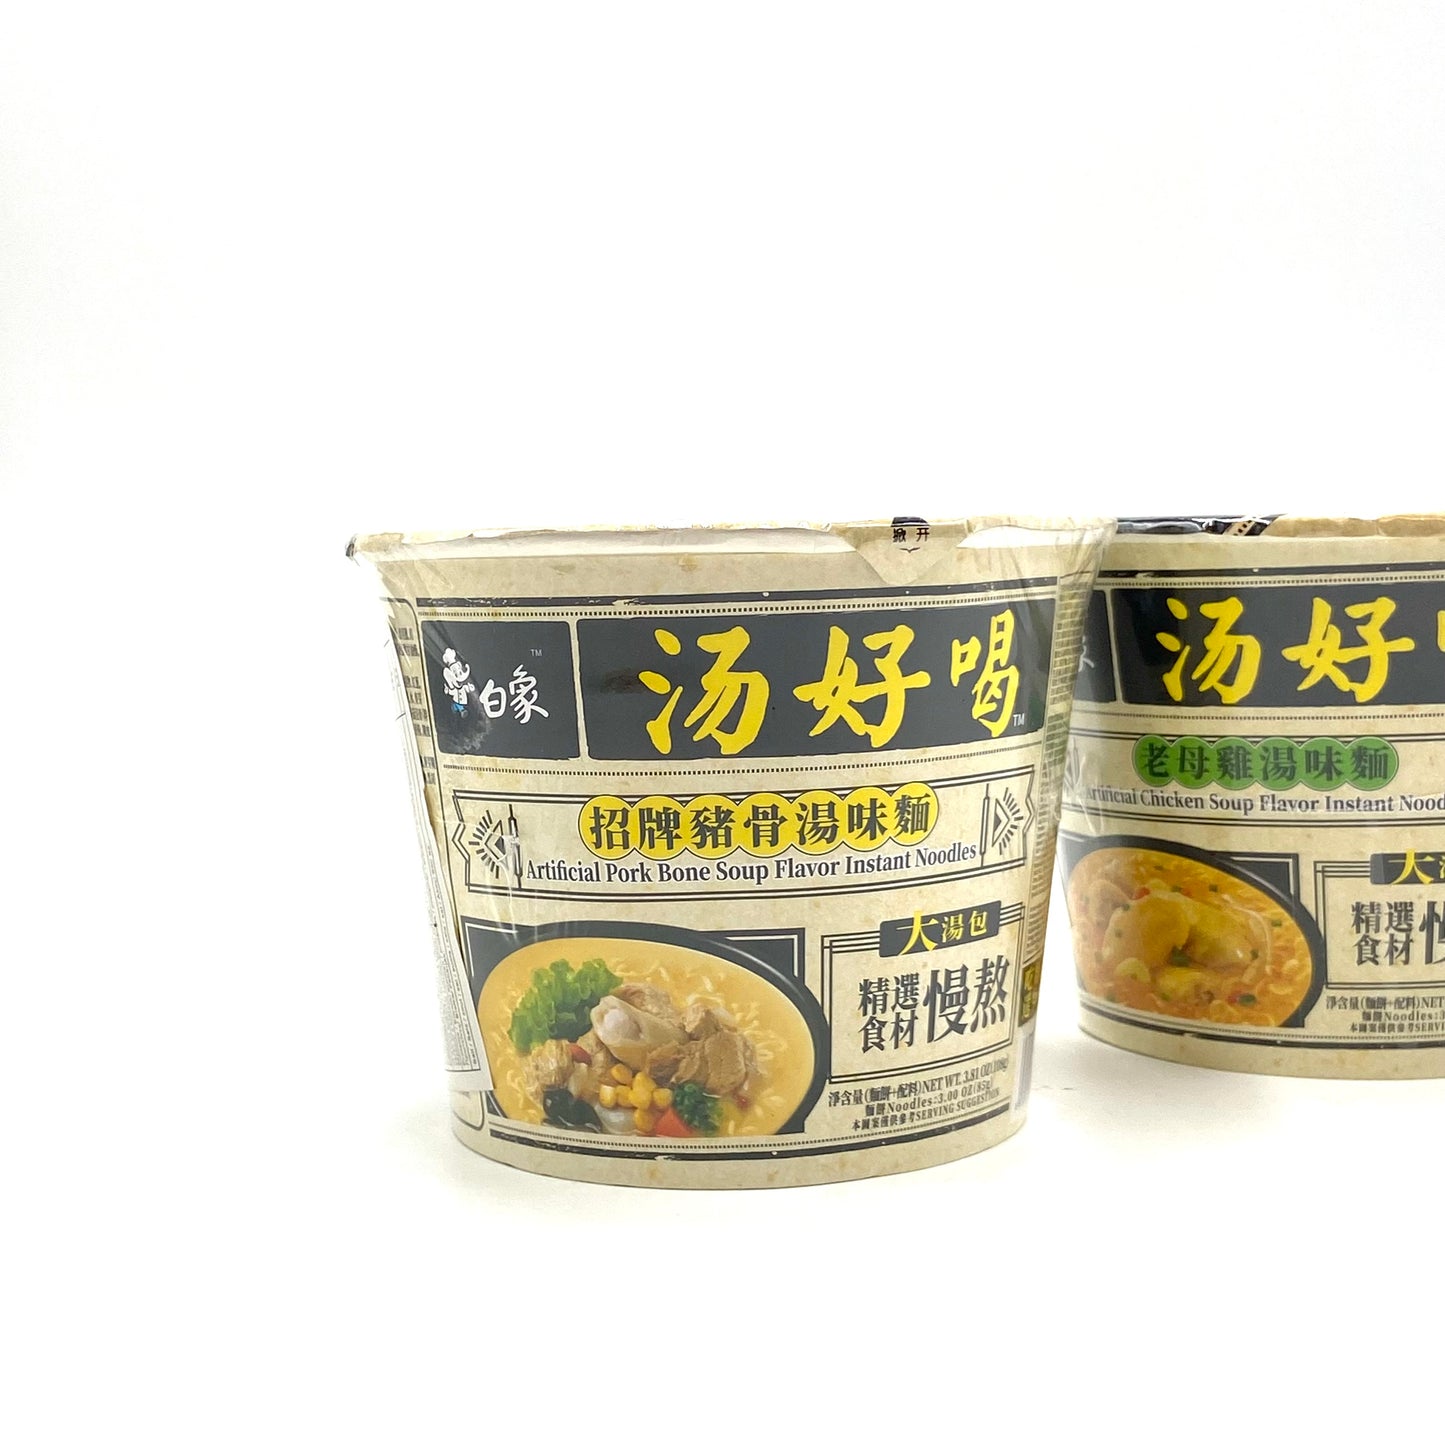 BaiXiang cup inst Noodles Maiale 107g 白象 汤好喝招牌猪骨味桶面